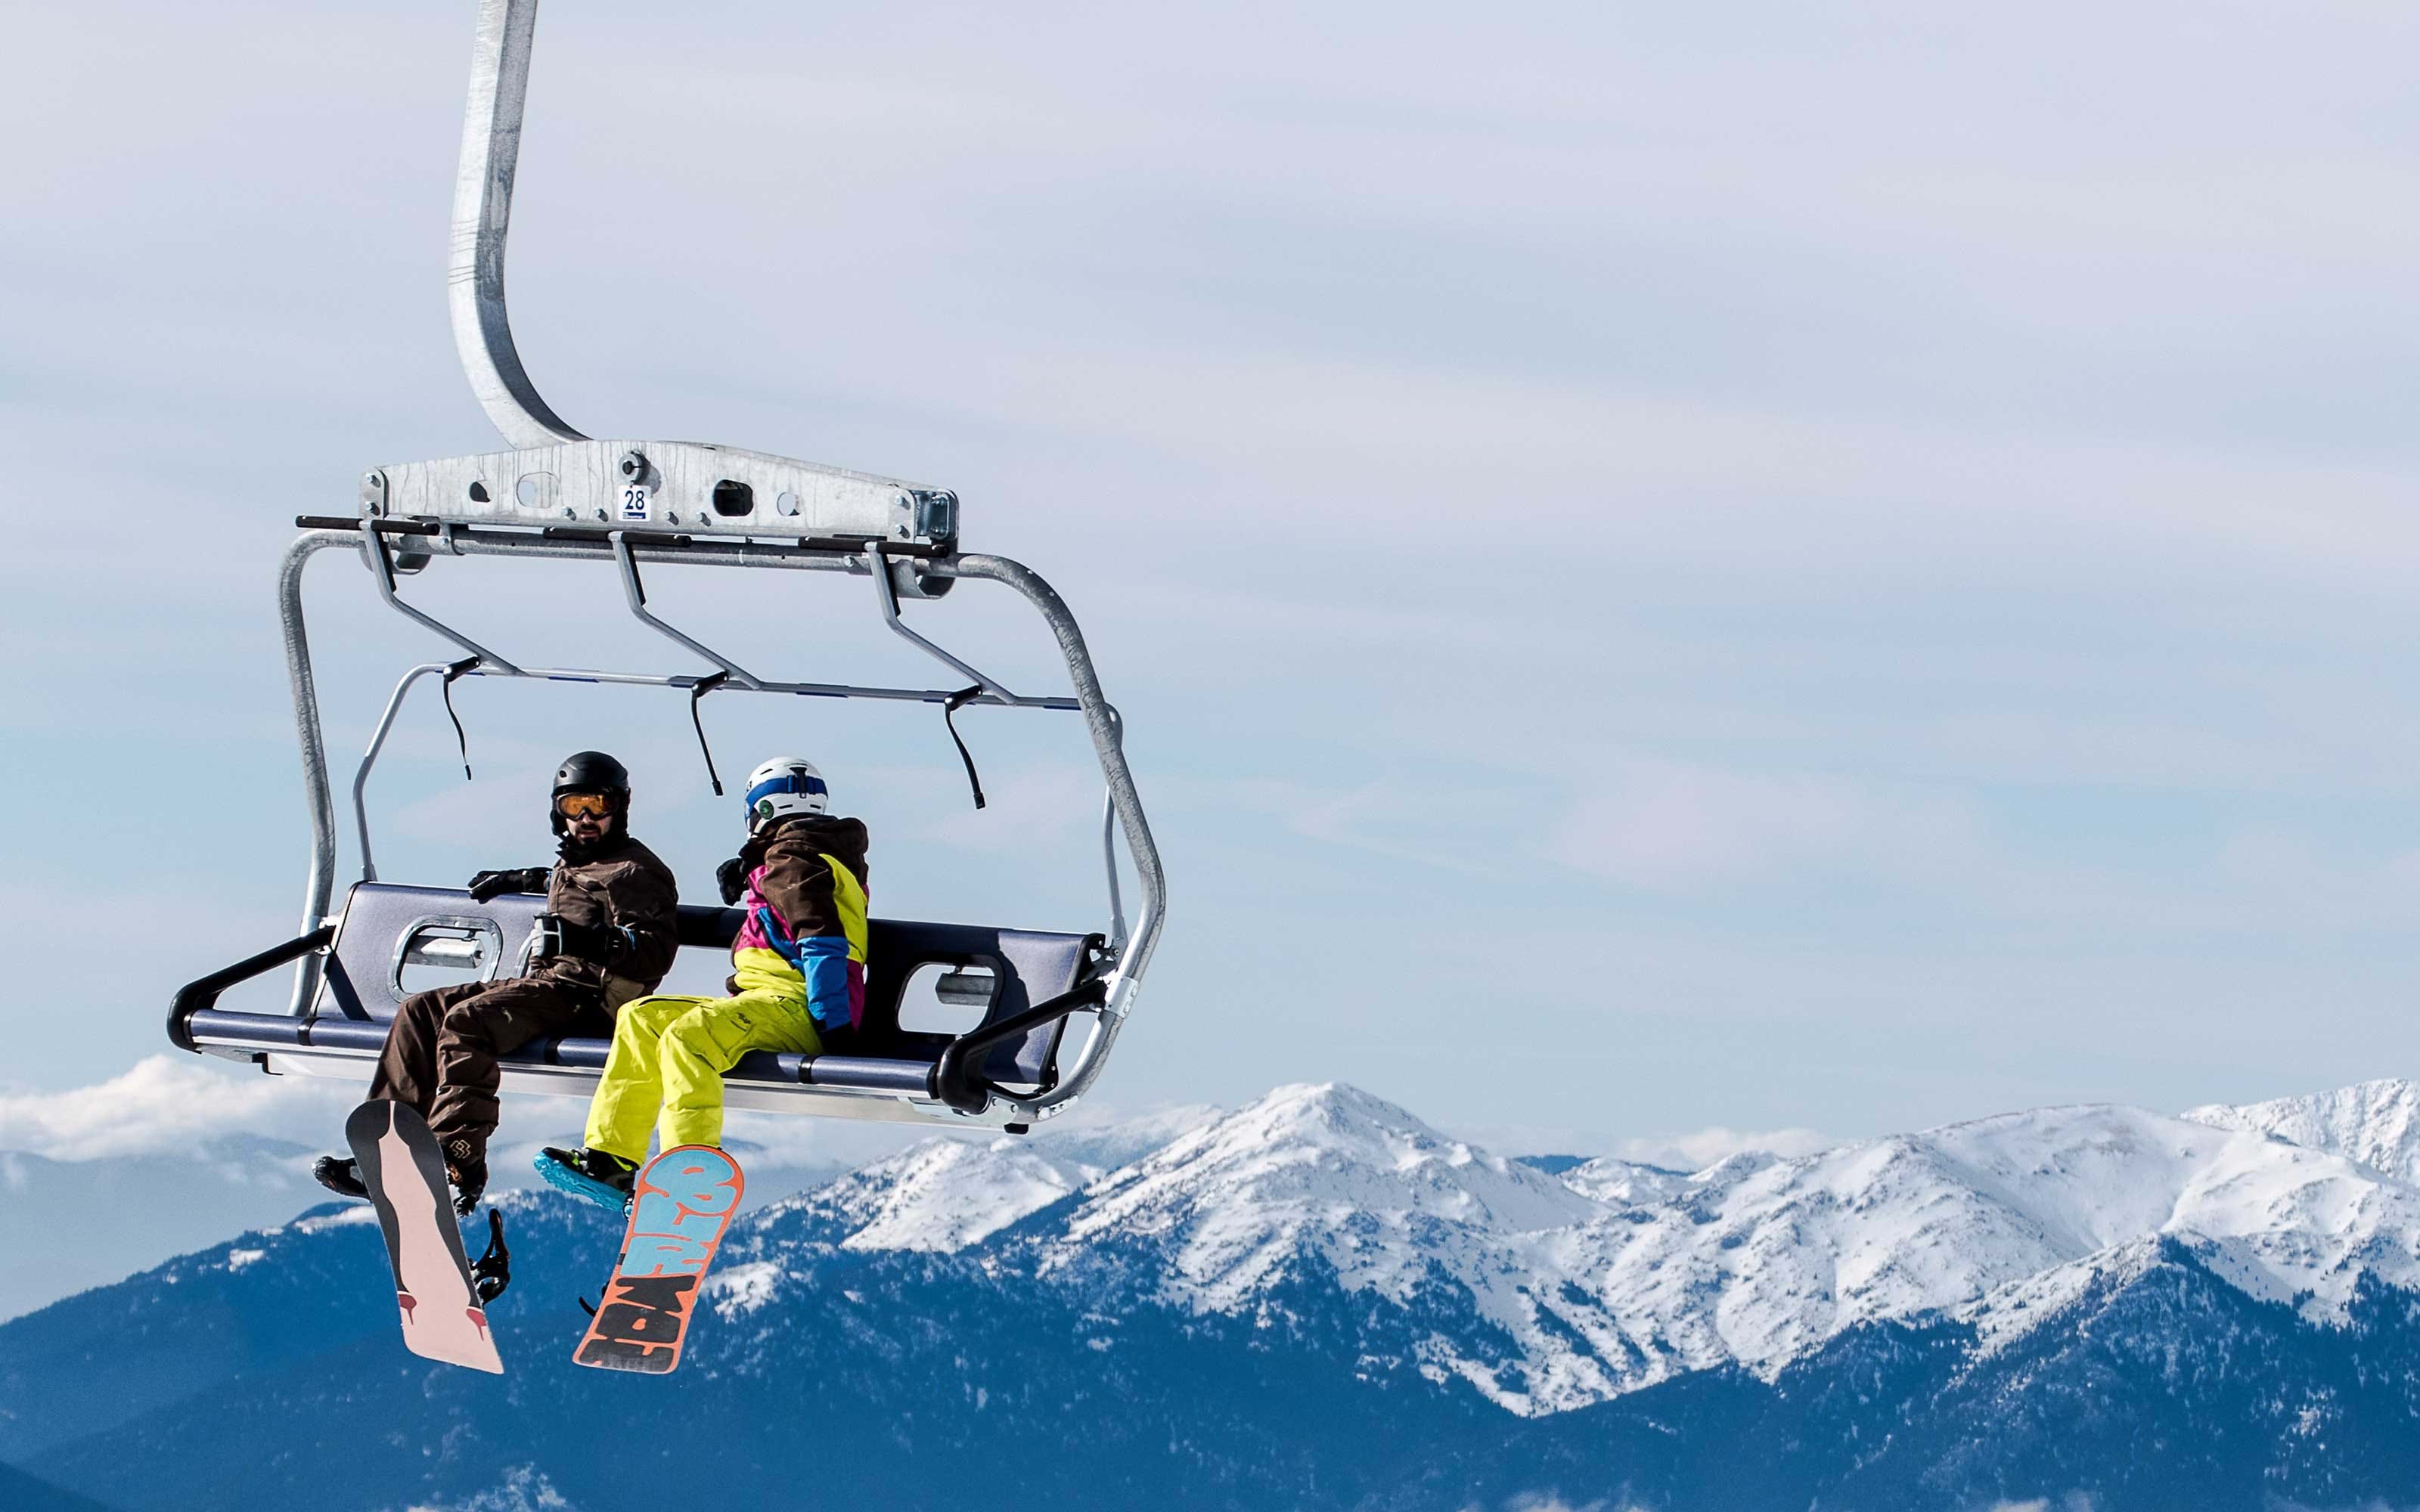 Pair of snowboarders on ski lift